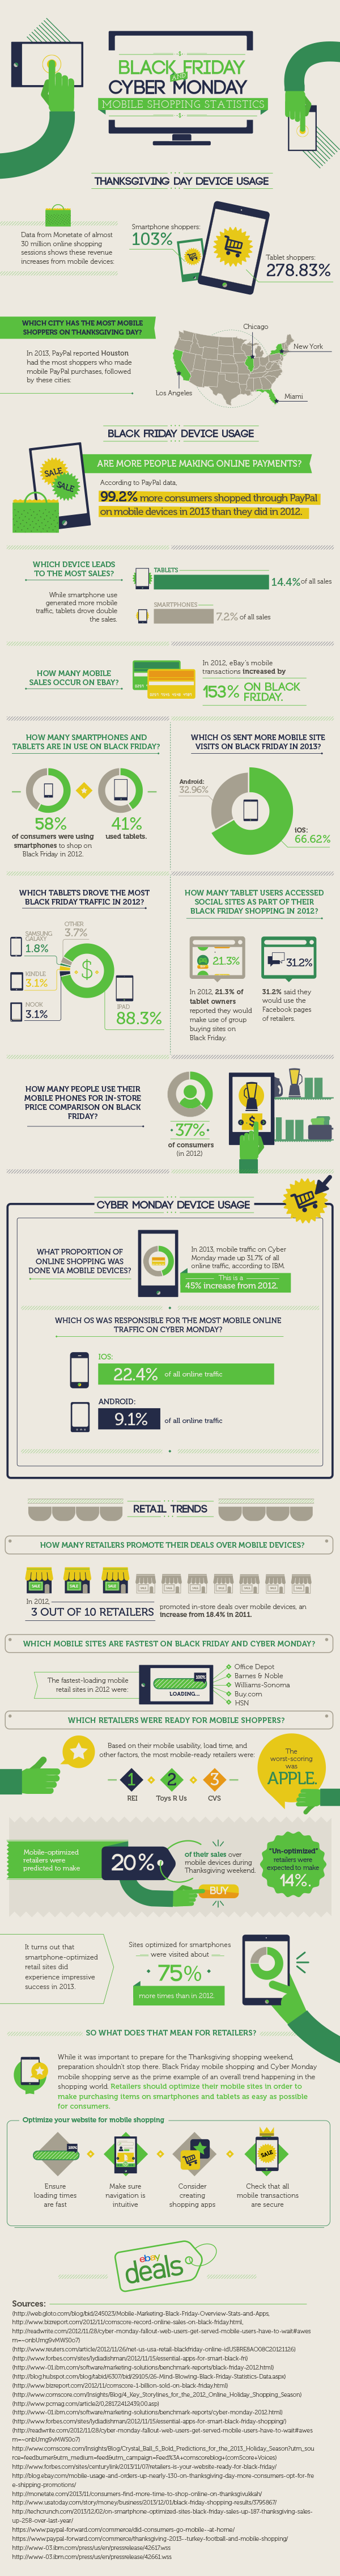 Black Friday/Cyber Monday - Mobile Shopping Stats